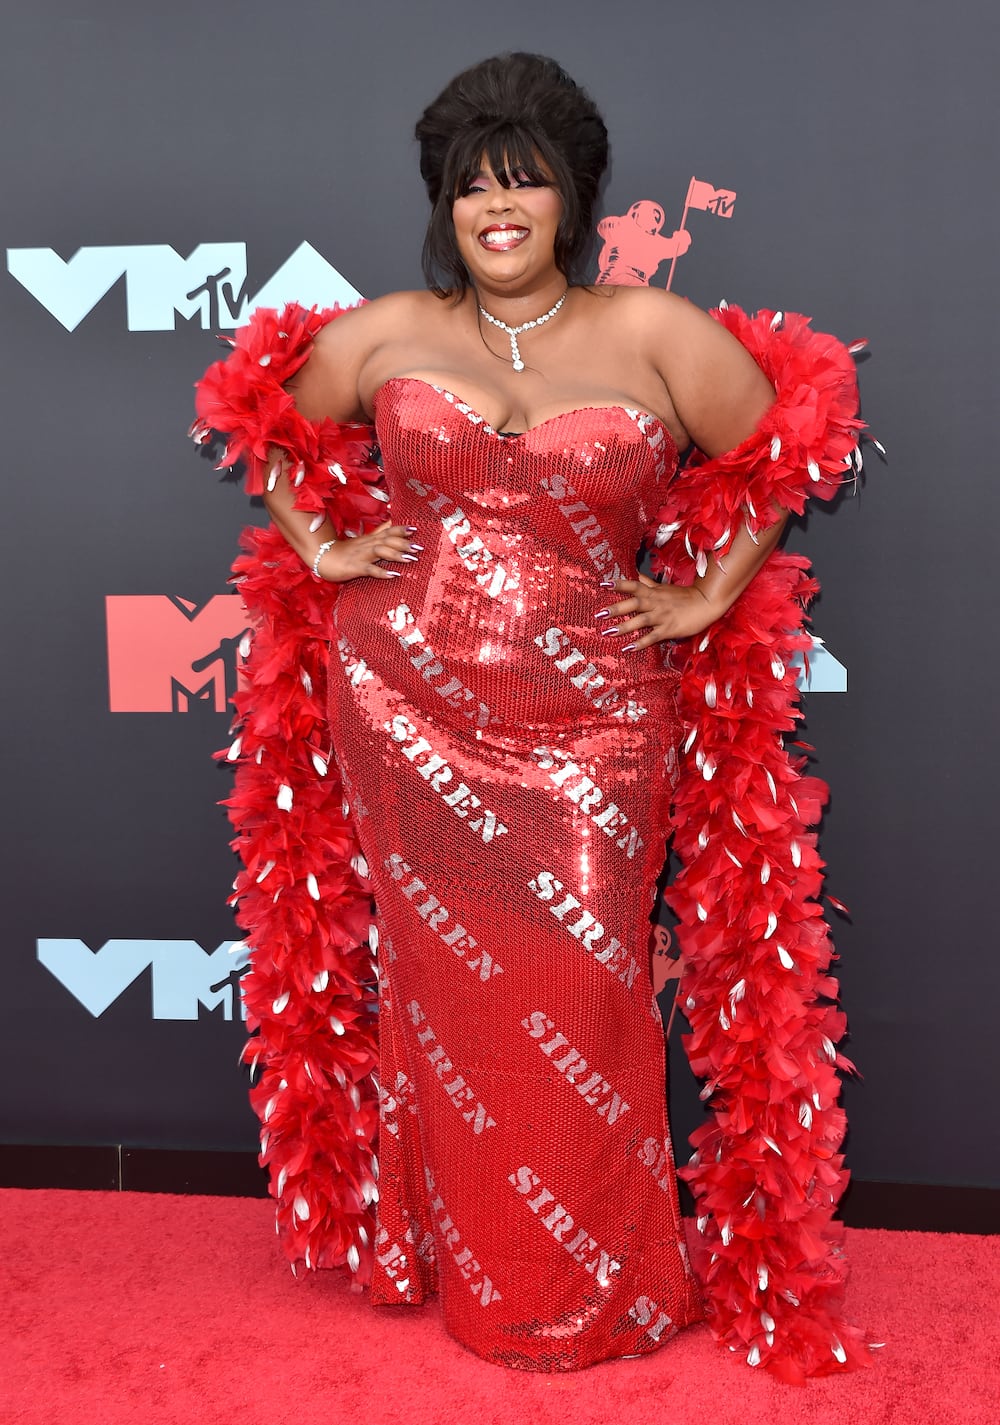 Lizzo's red carpet outfit